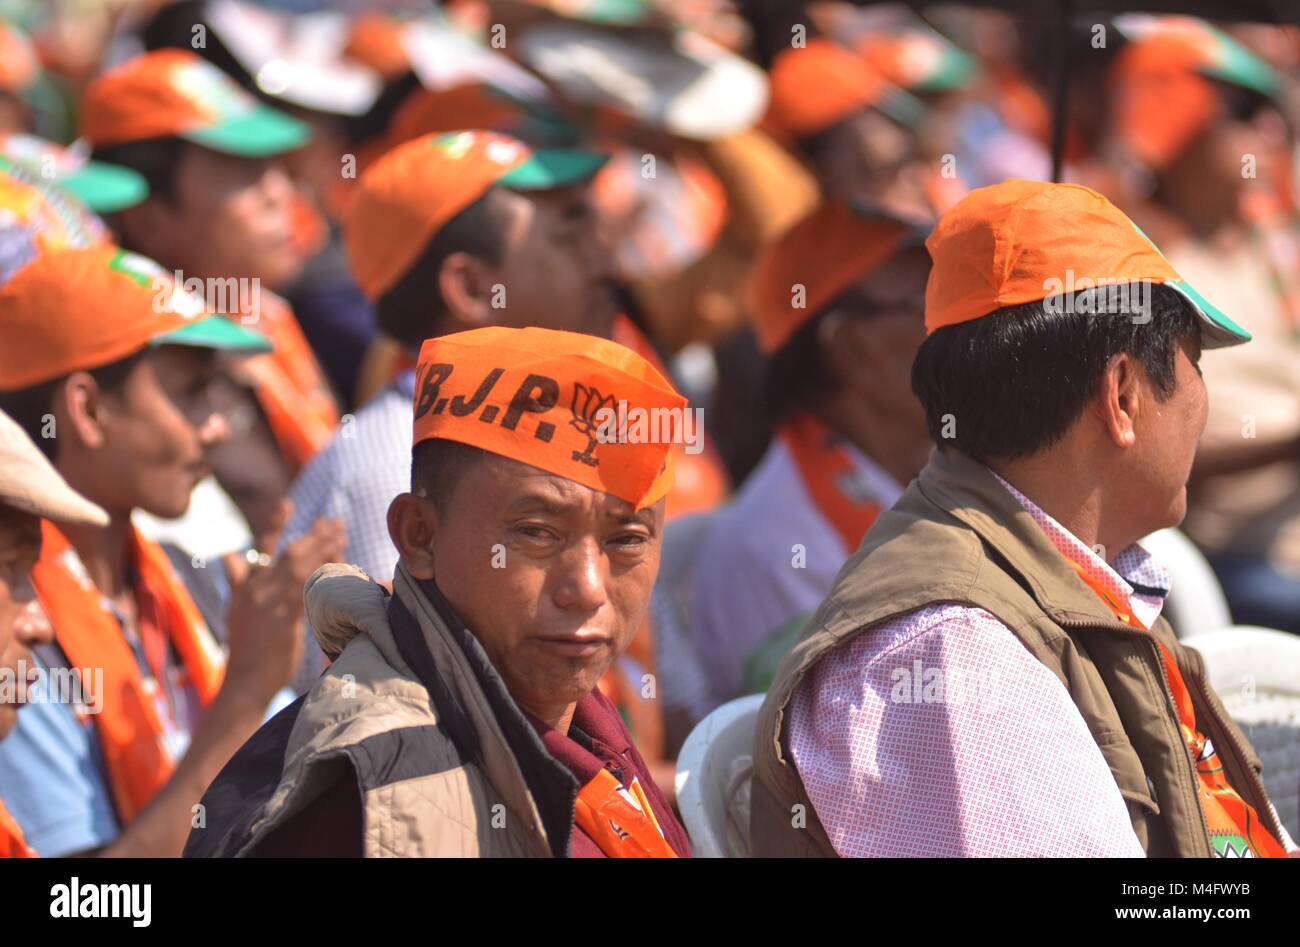 Dimapur, Nagaland, India. Feb 16th, 2018: Supporters of Bharatiya Janata  Party (BJP) at an election rally for Bharatiya Janata Party (BJP) ahead of  Nagaland, India. legeslative assembly election at Chumukidima in Dimapur,